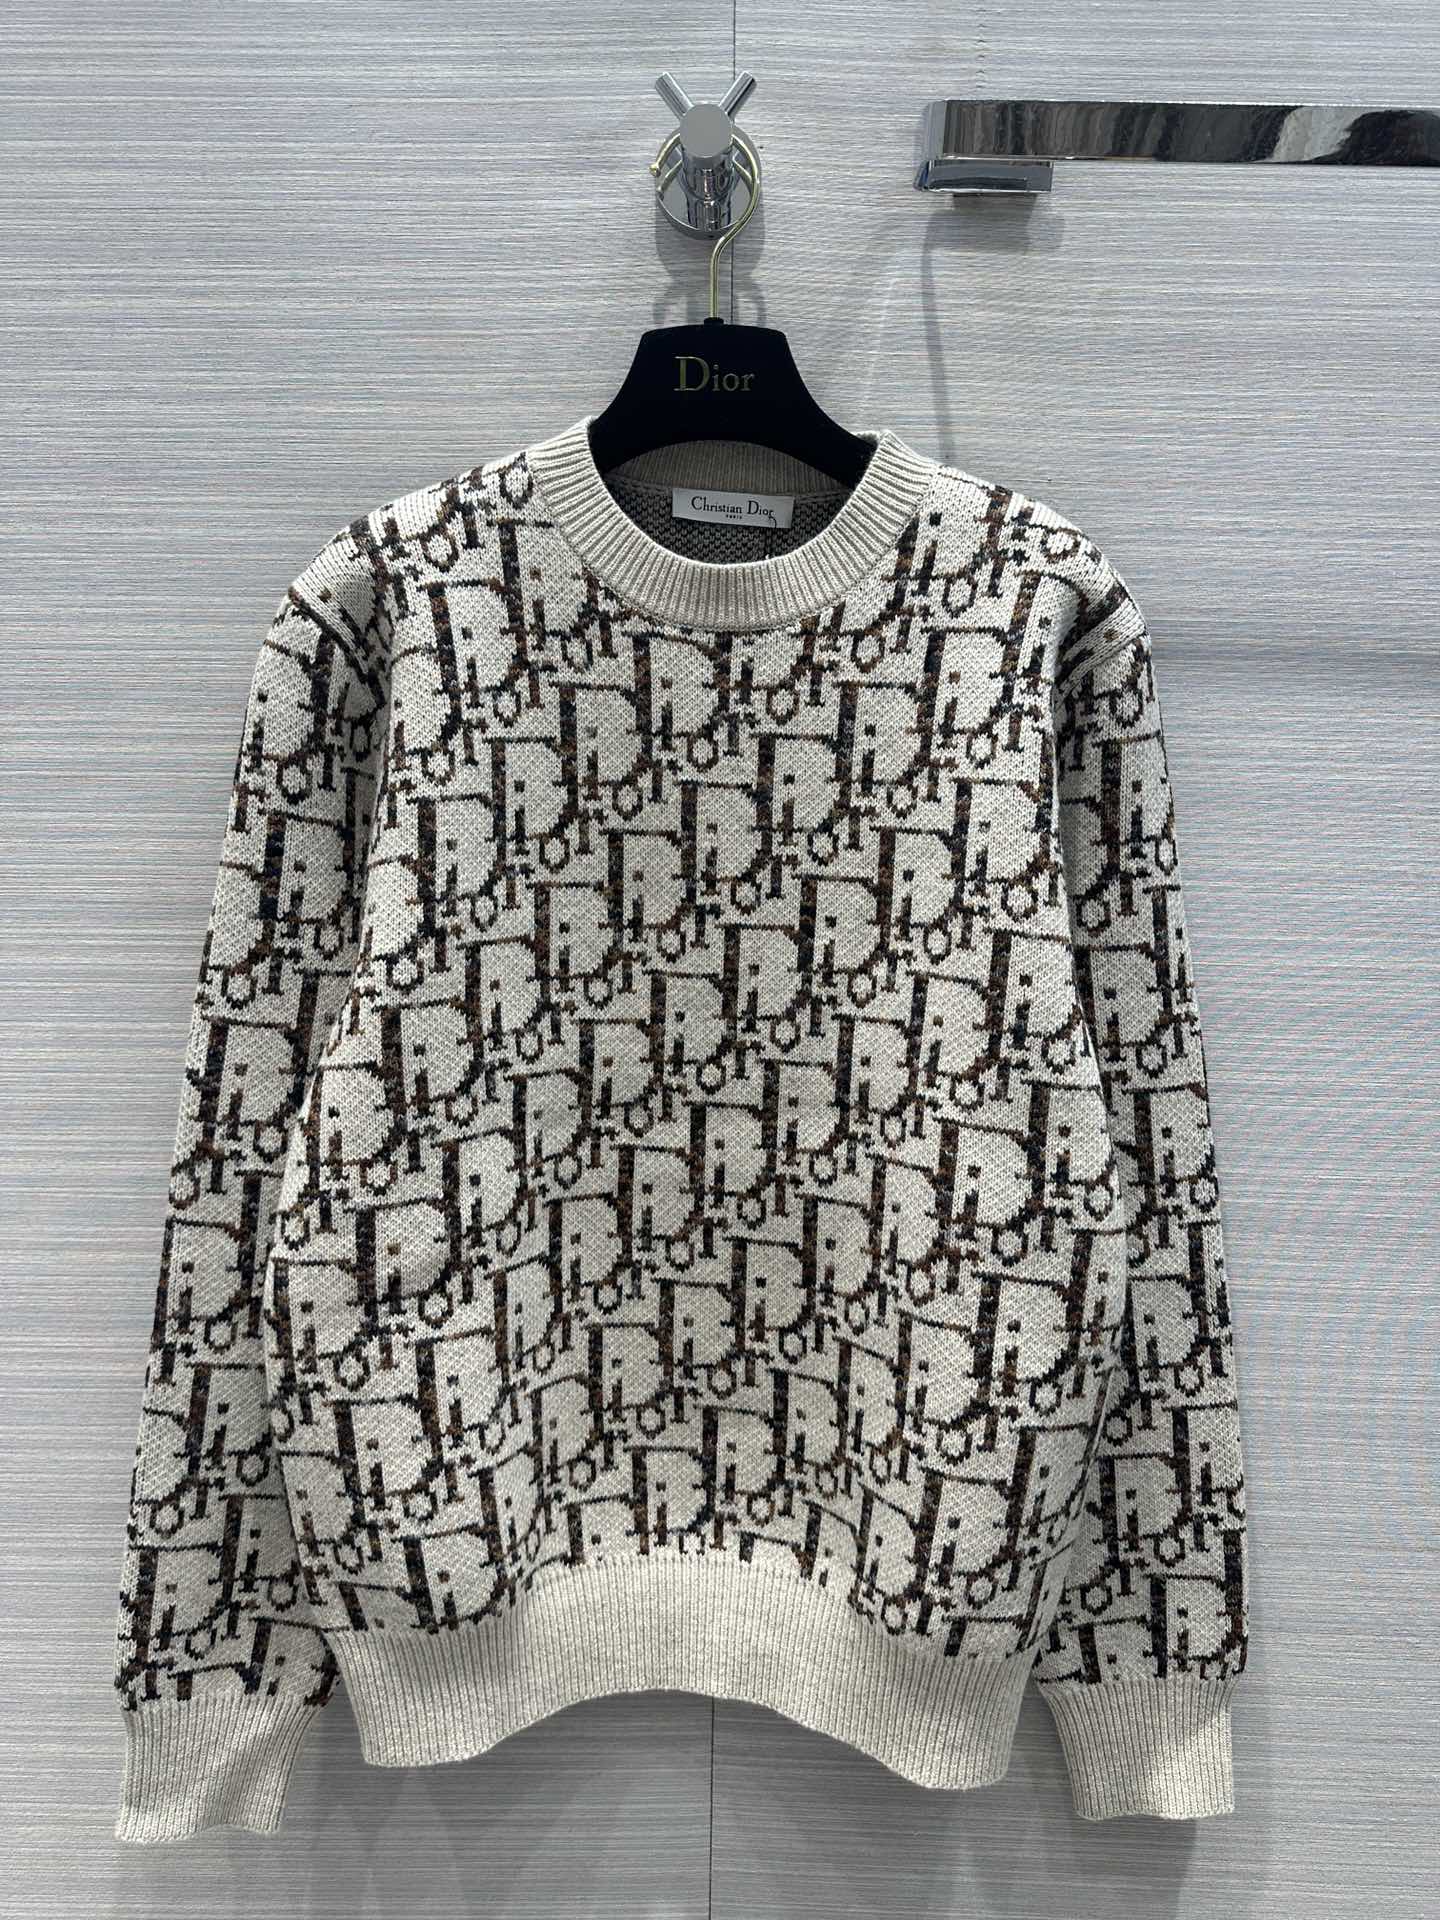 Dior New
 Clothing Sweatshirts High Quality 1:1 Replica
 Unisex Wool Fall/Winter Collection Oblique Long Sleeve